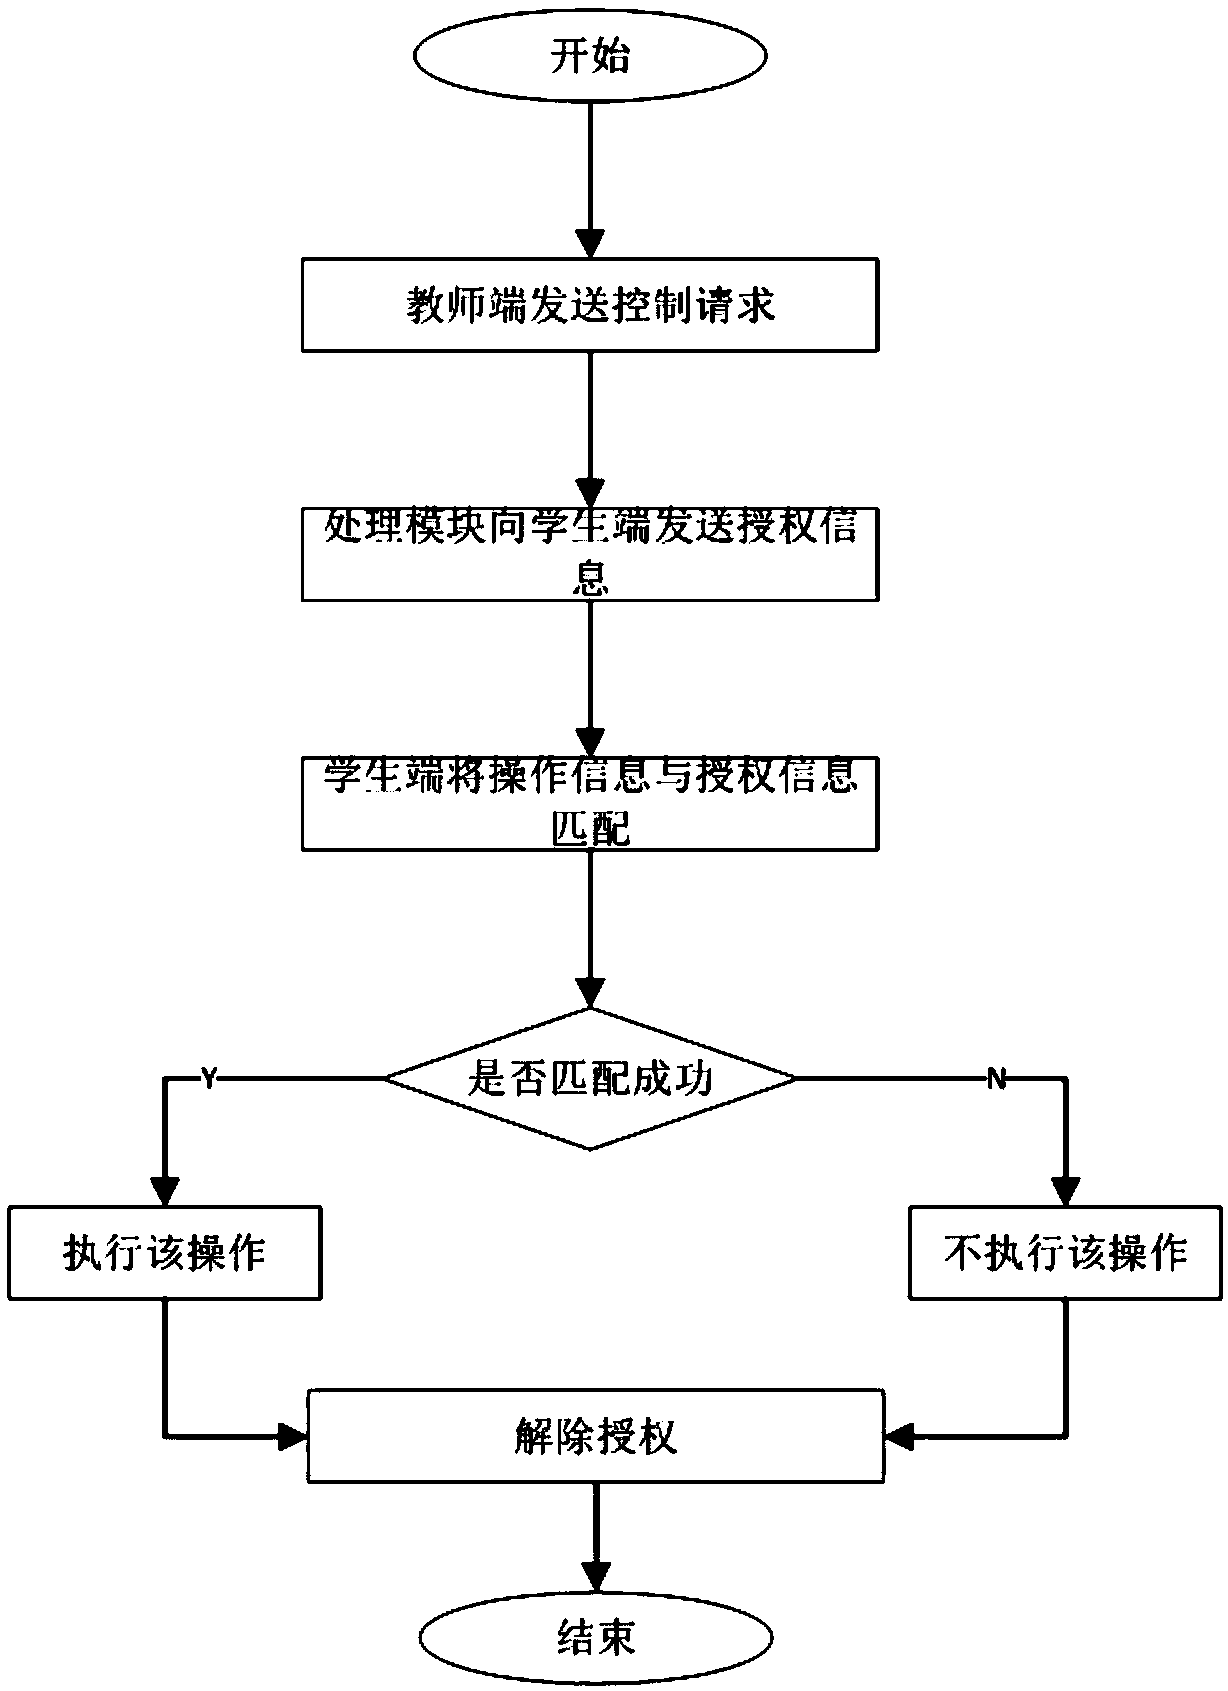 Authority assignment method for preschool education system